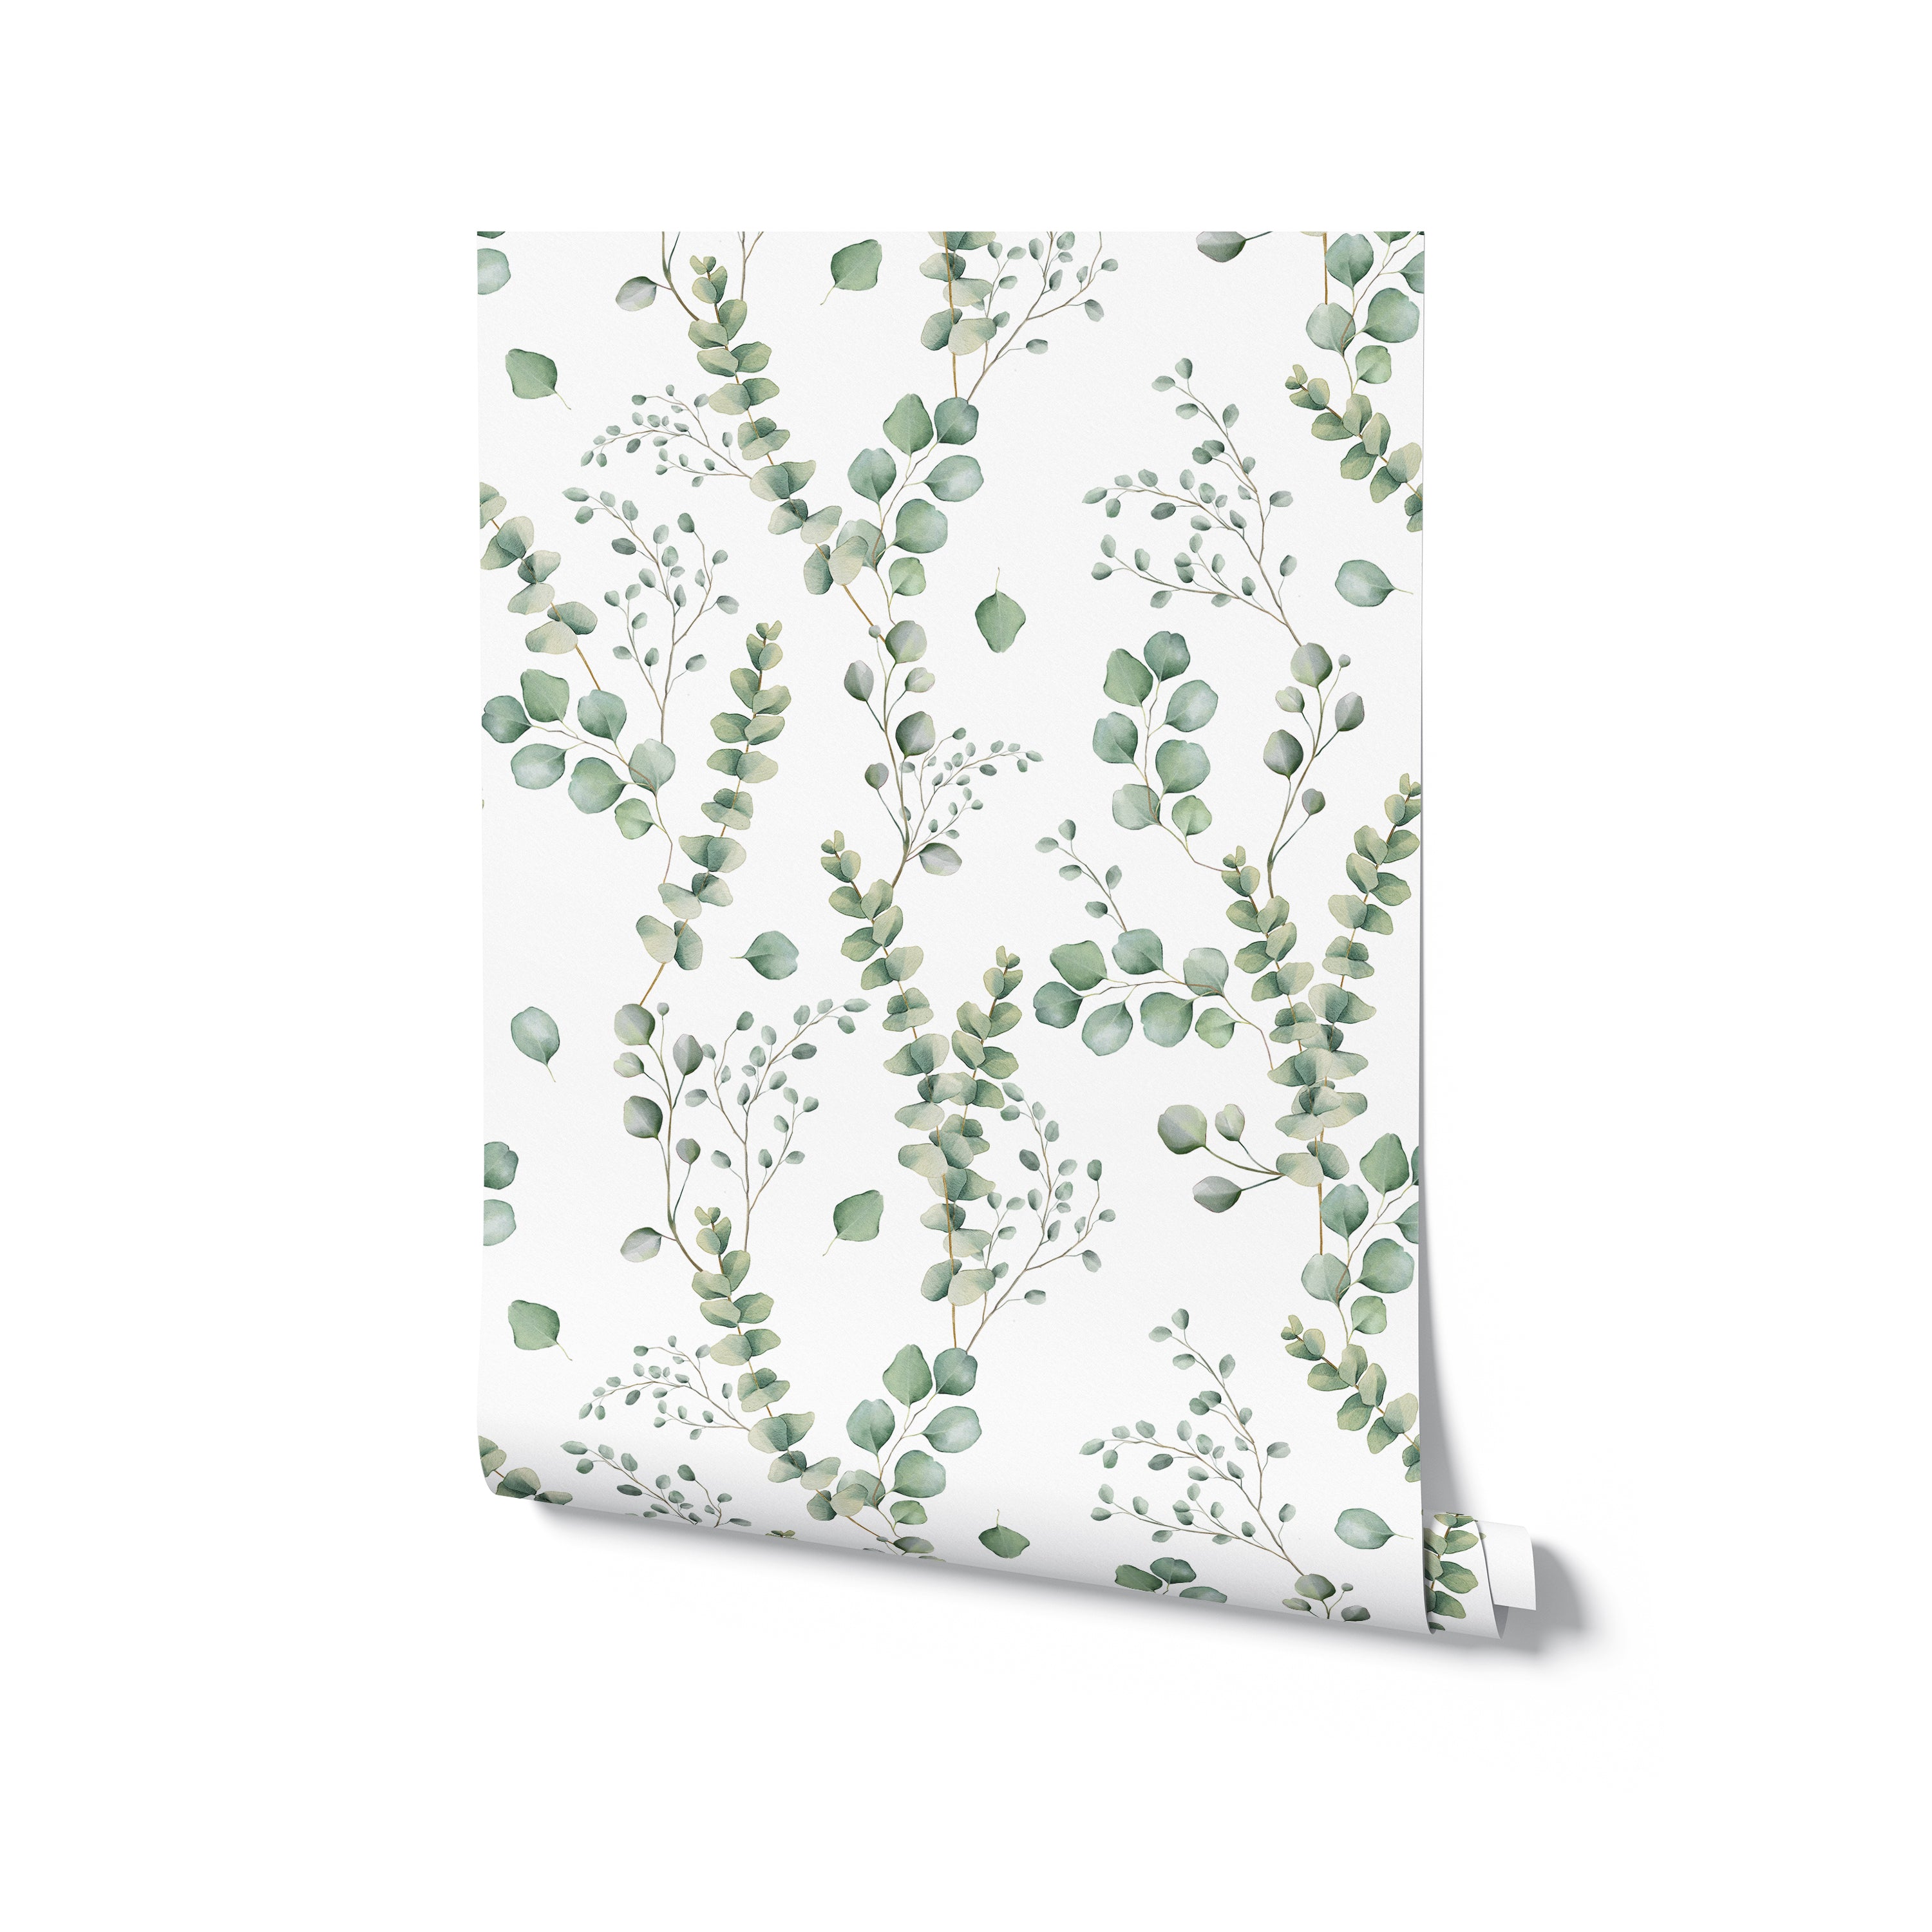 A close-up view of the Botanical Meadow Wallpaper, displaying the intricate details of the watercolor eucalyptus leaves in various shades of soft green. The wallpaper exudes a calm and natural atmosphere, suitable for creating a peaceful space.